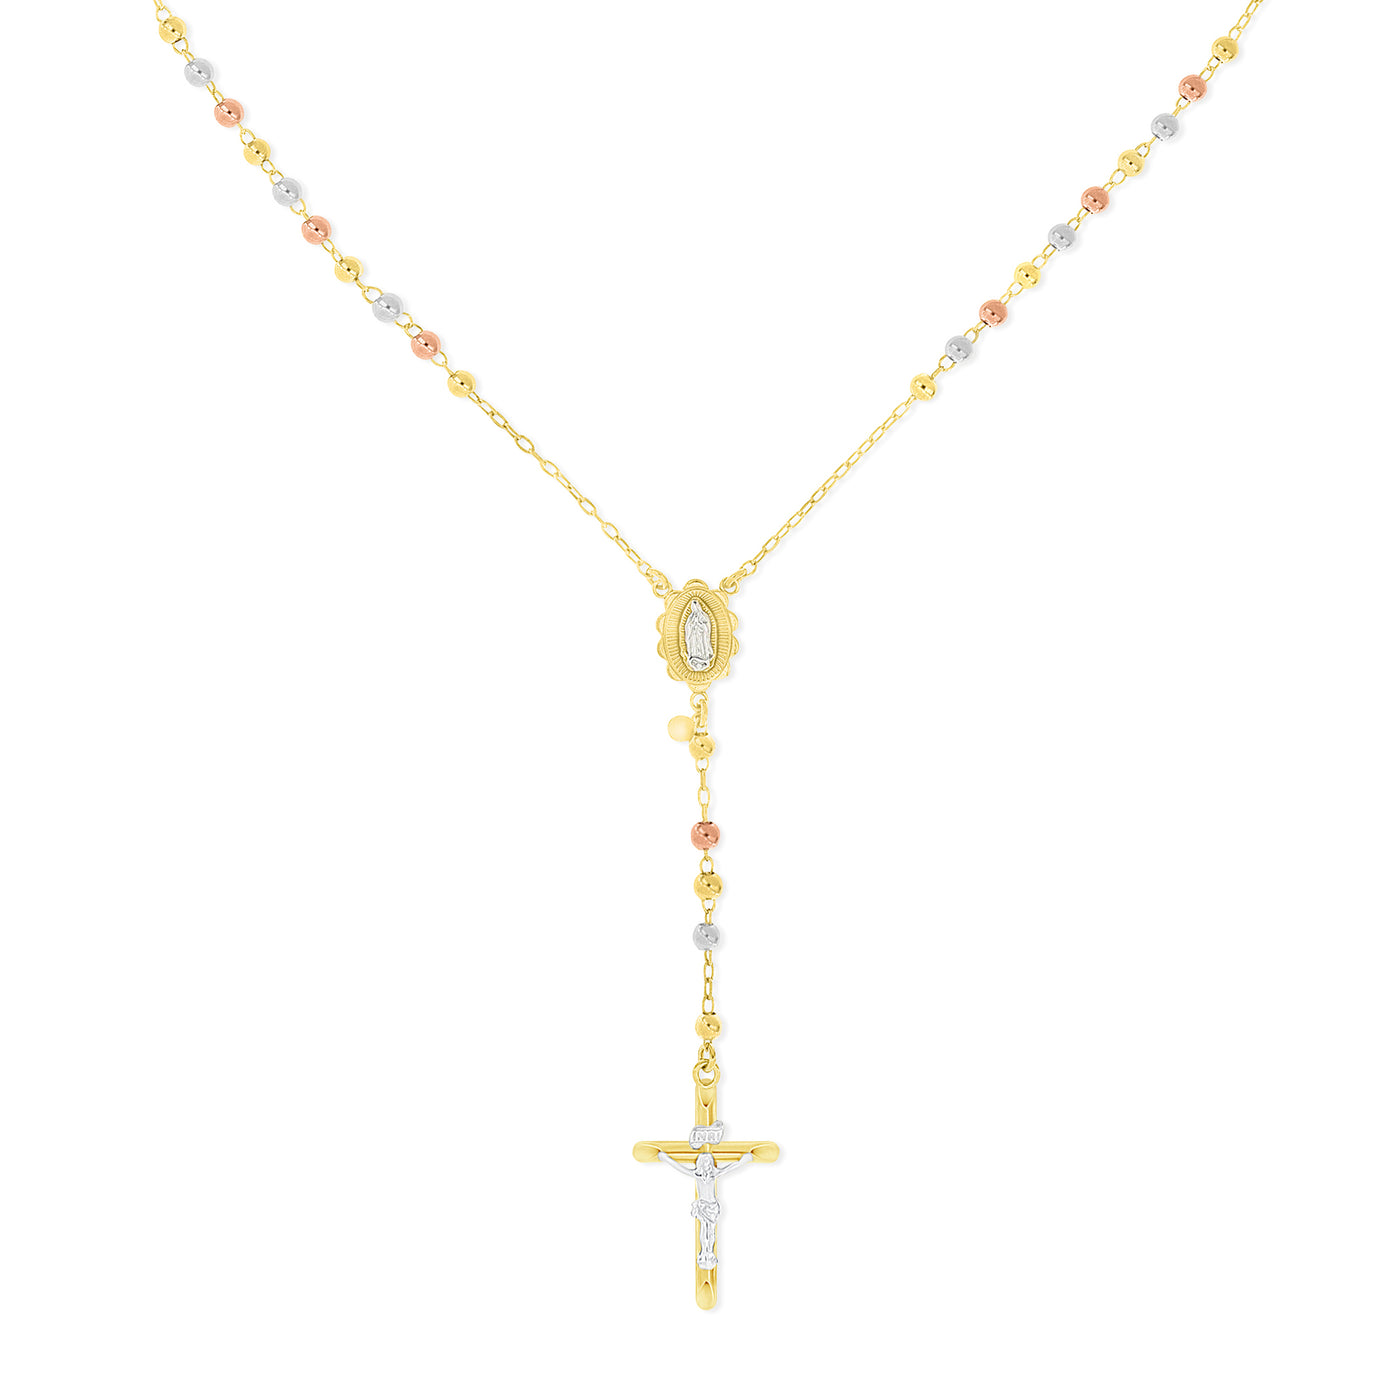 Rosary Necklace with Polished Beads and Crucifix Pendant - Gloria Jewels